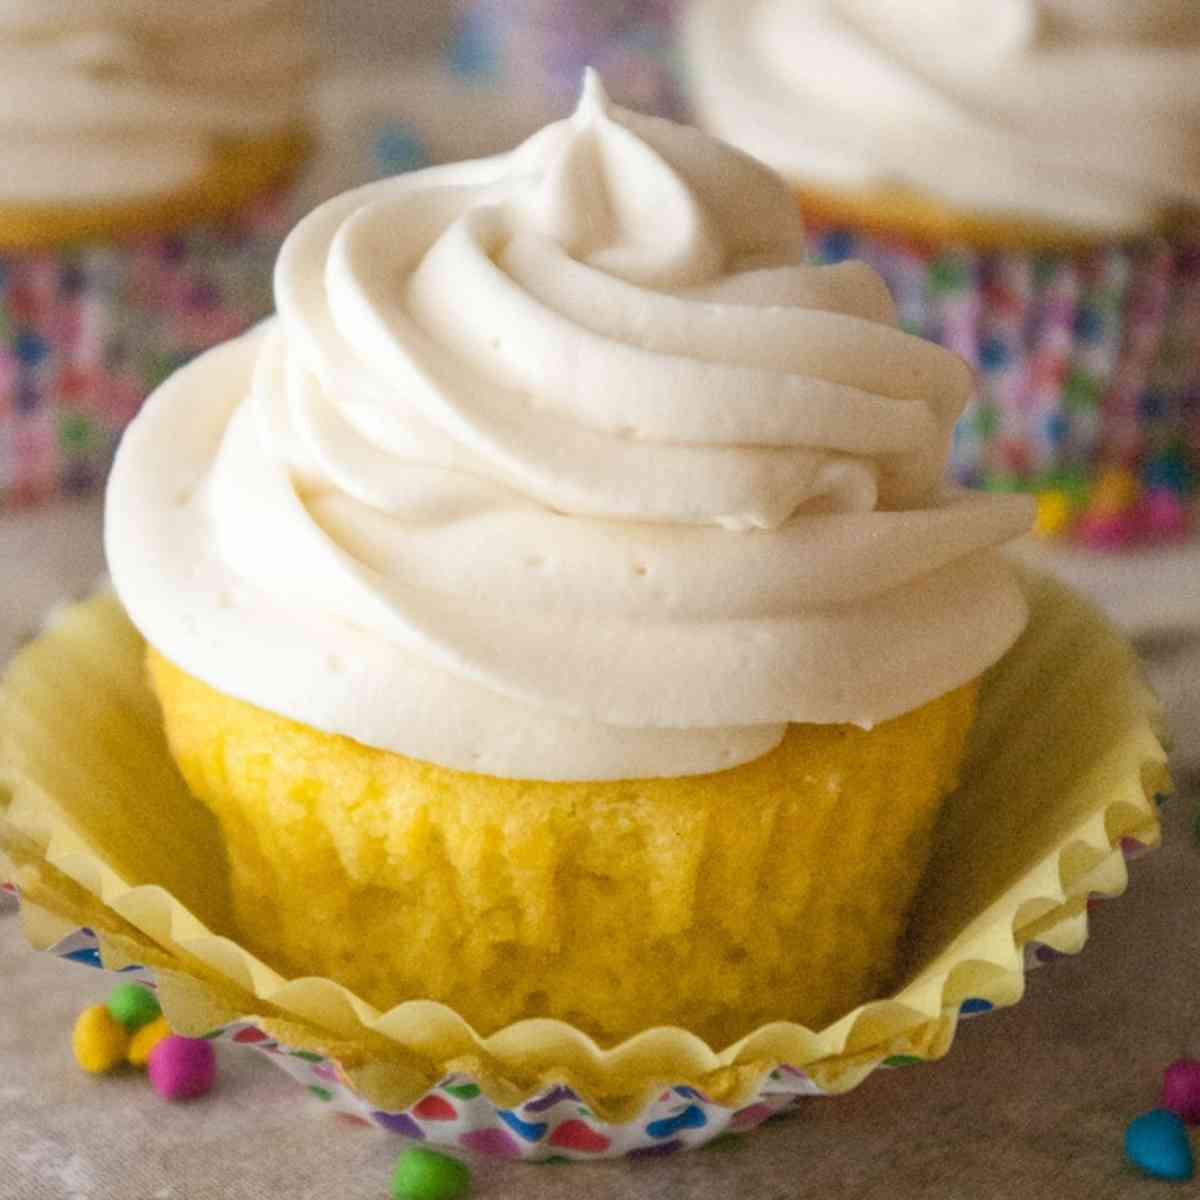 A Lemon cupcake frosted with whipped cream cheese frosting